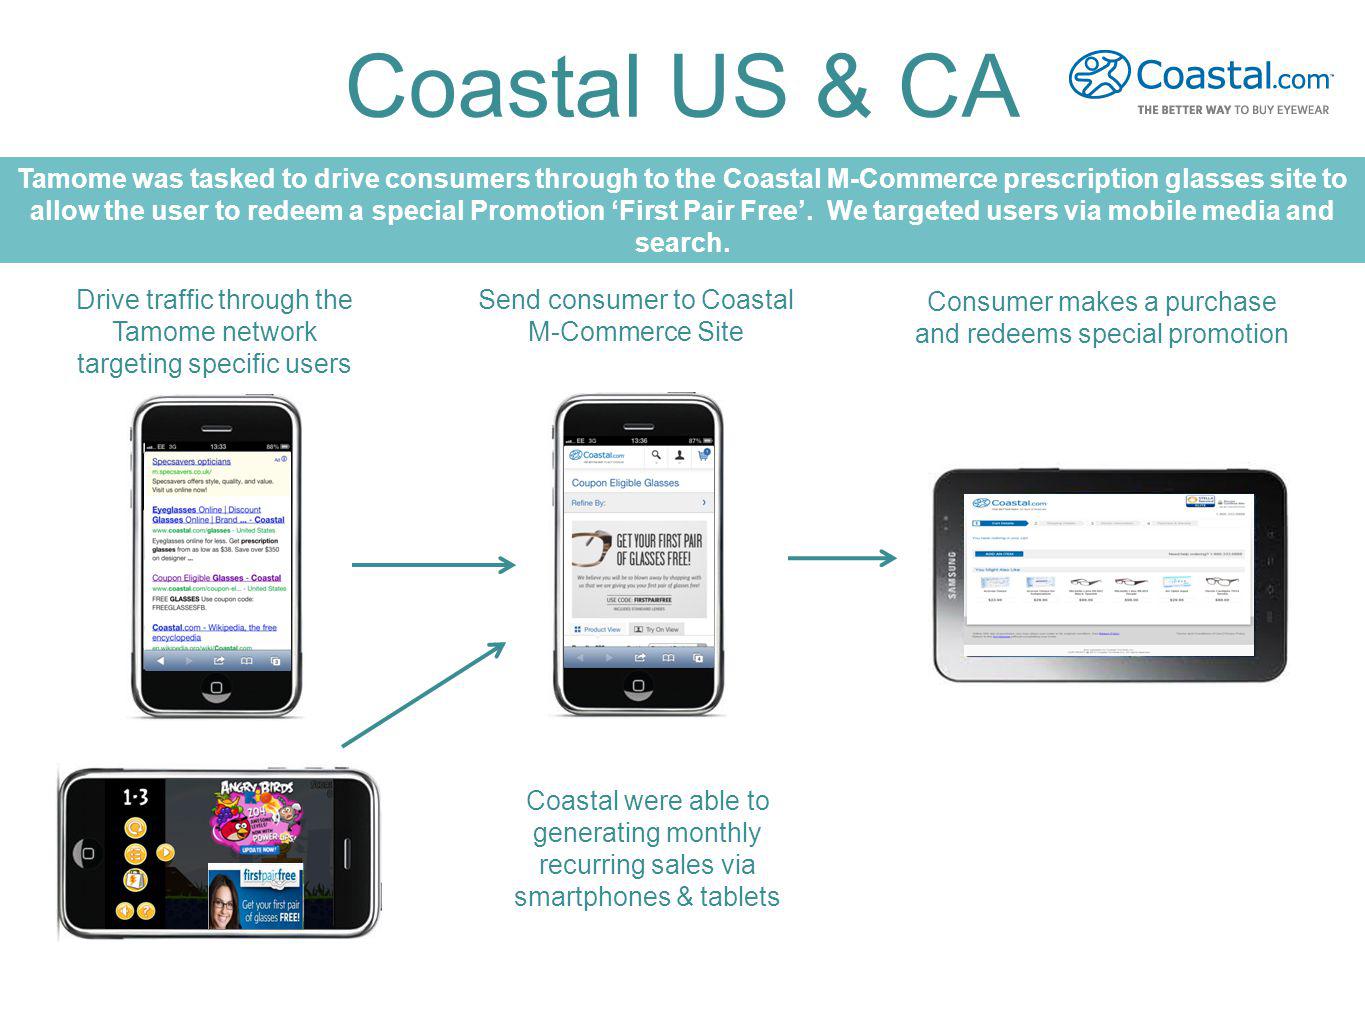 CONFIDENTIAL Coastal US & CA Drive traffic through the Tamome network targeting specific users Send consumer to Coastal M-Commerce Site Consumer makes a purchase and redeems special promotion Tamome was tasked to drive consumers through to the Coastal M-Commerce prescription glasses site to allow the user to redeem a special Promotion First Pair Free.